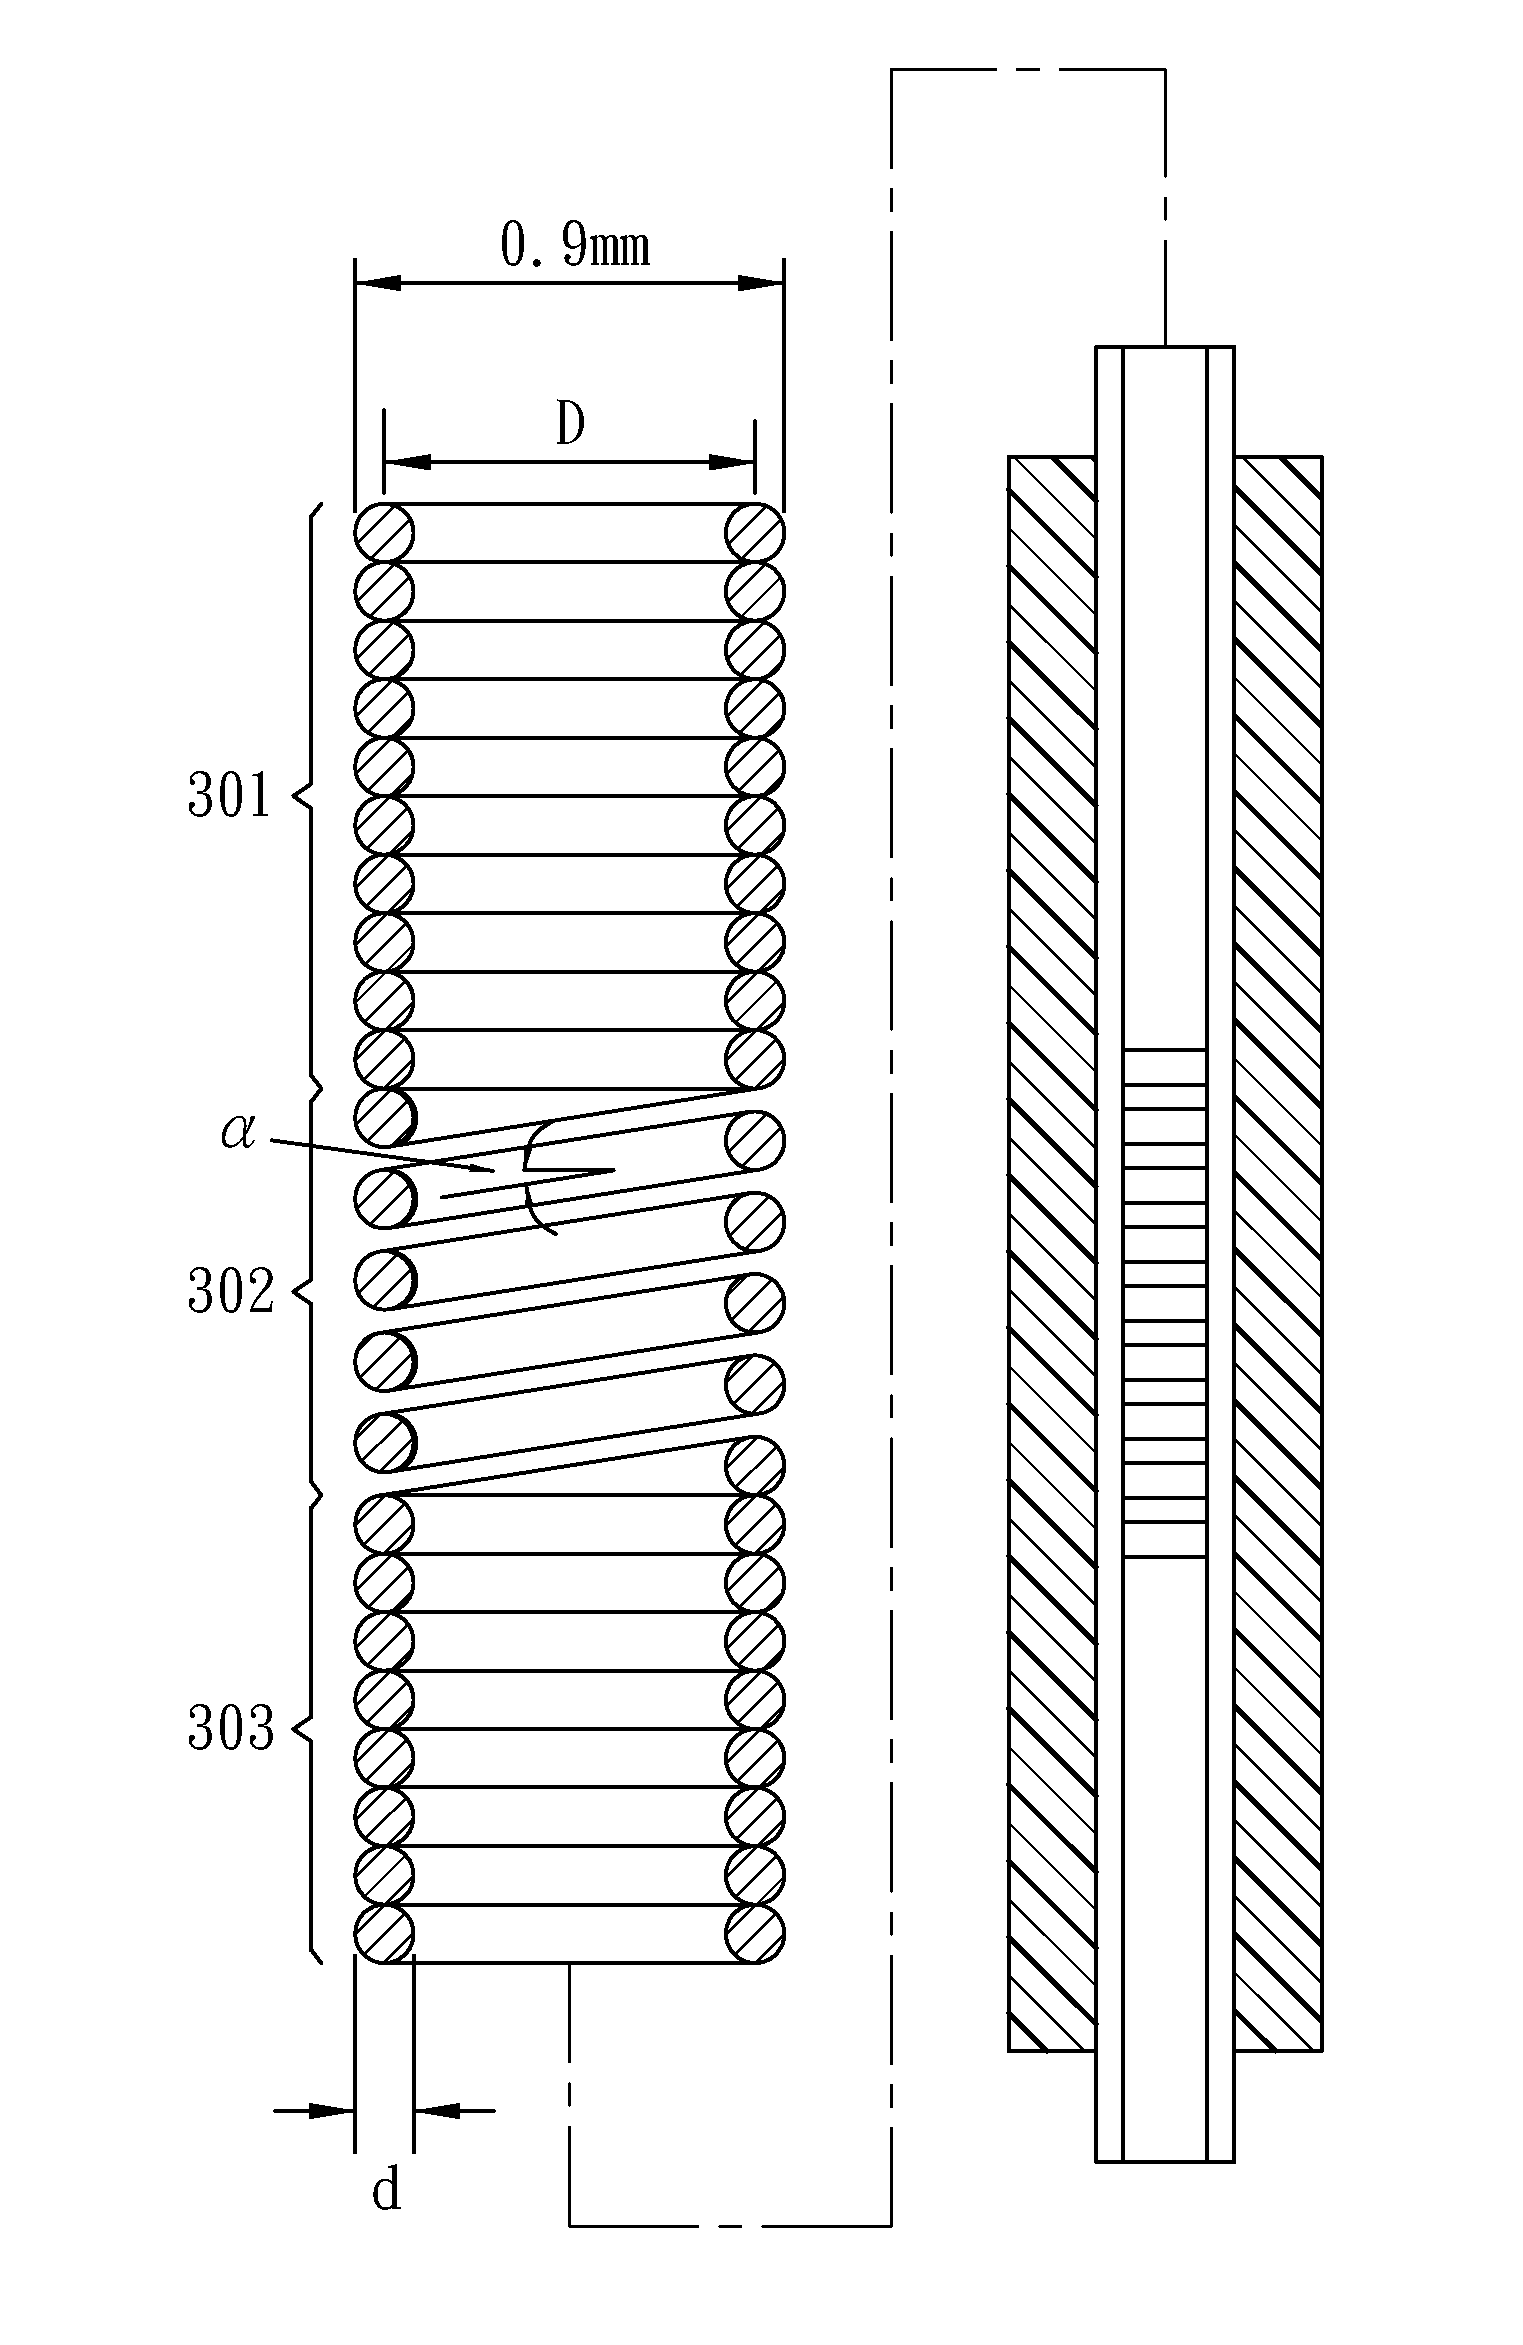 Self-tensed and fully spring jacketed optical fiber sensing structure